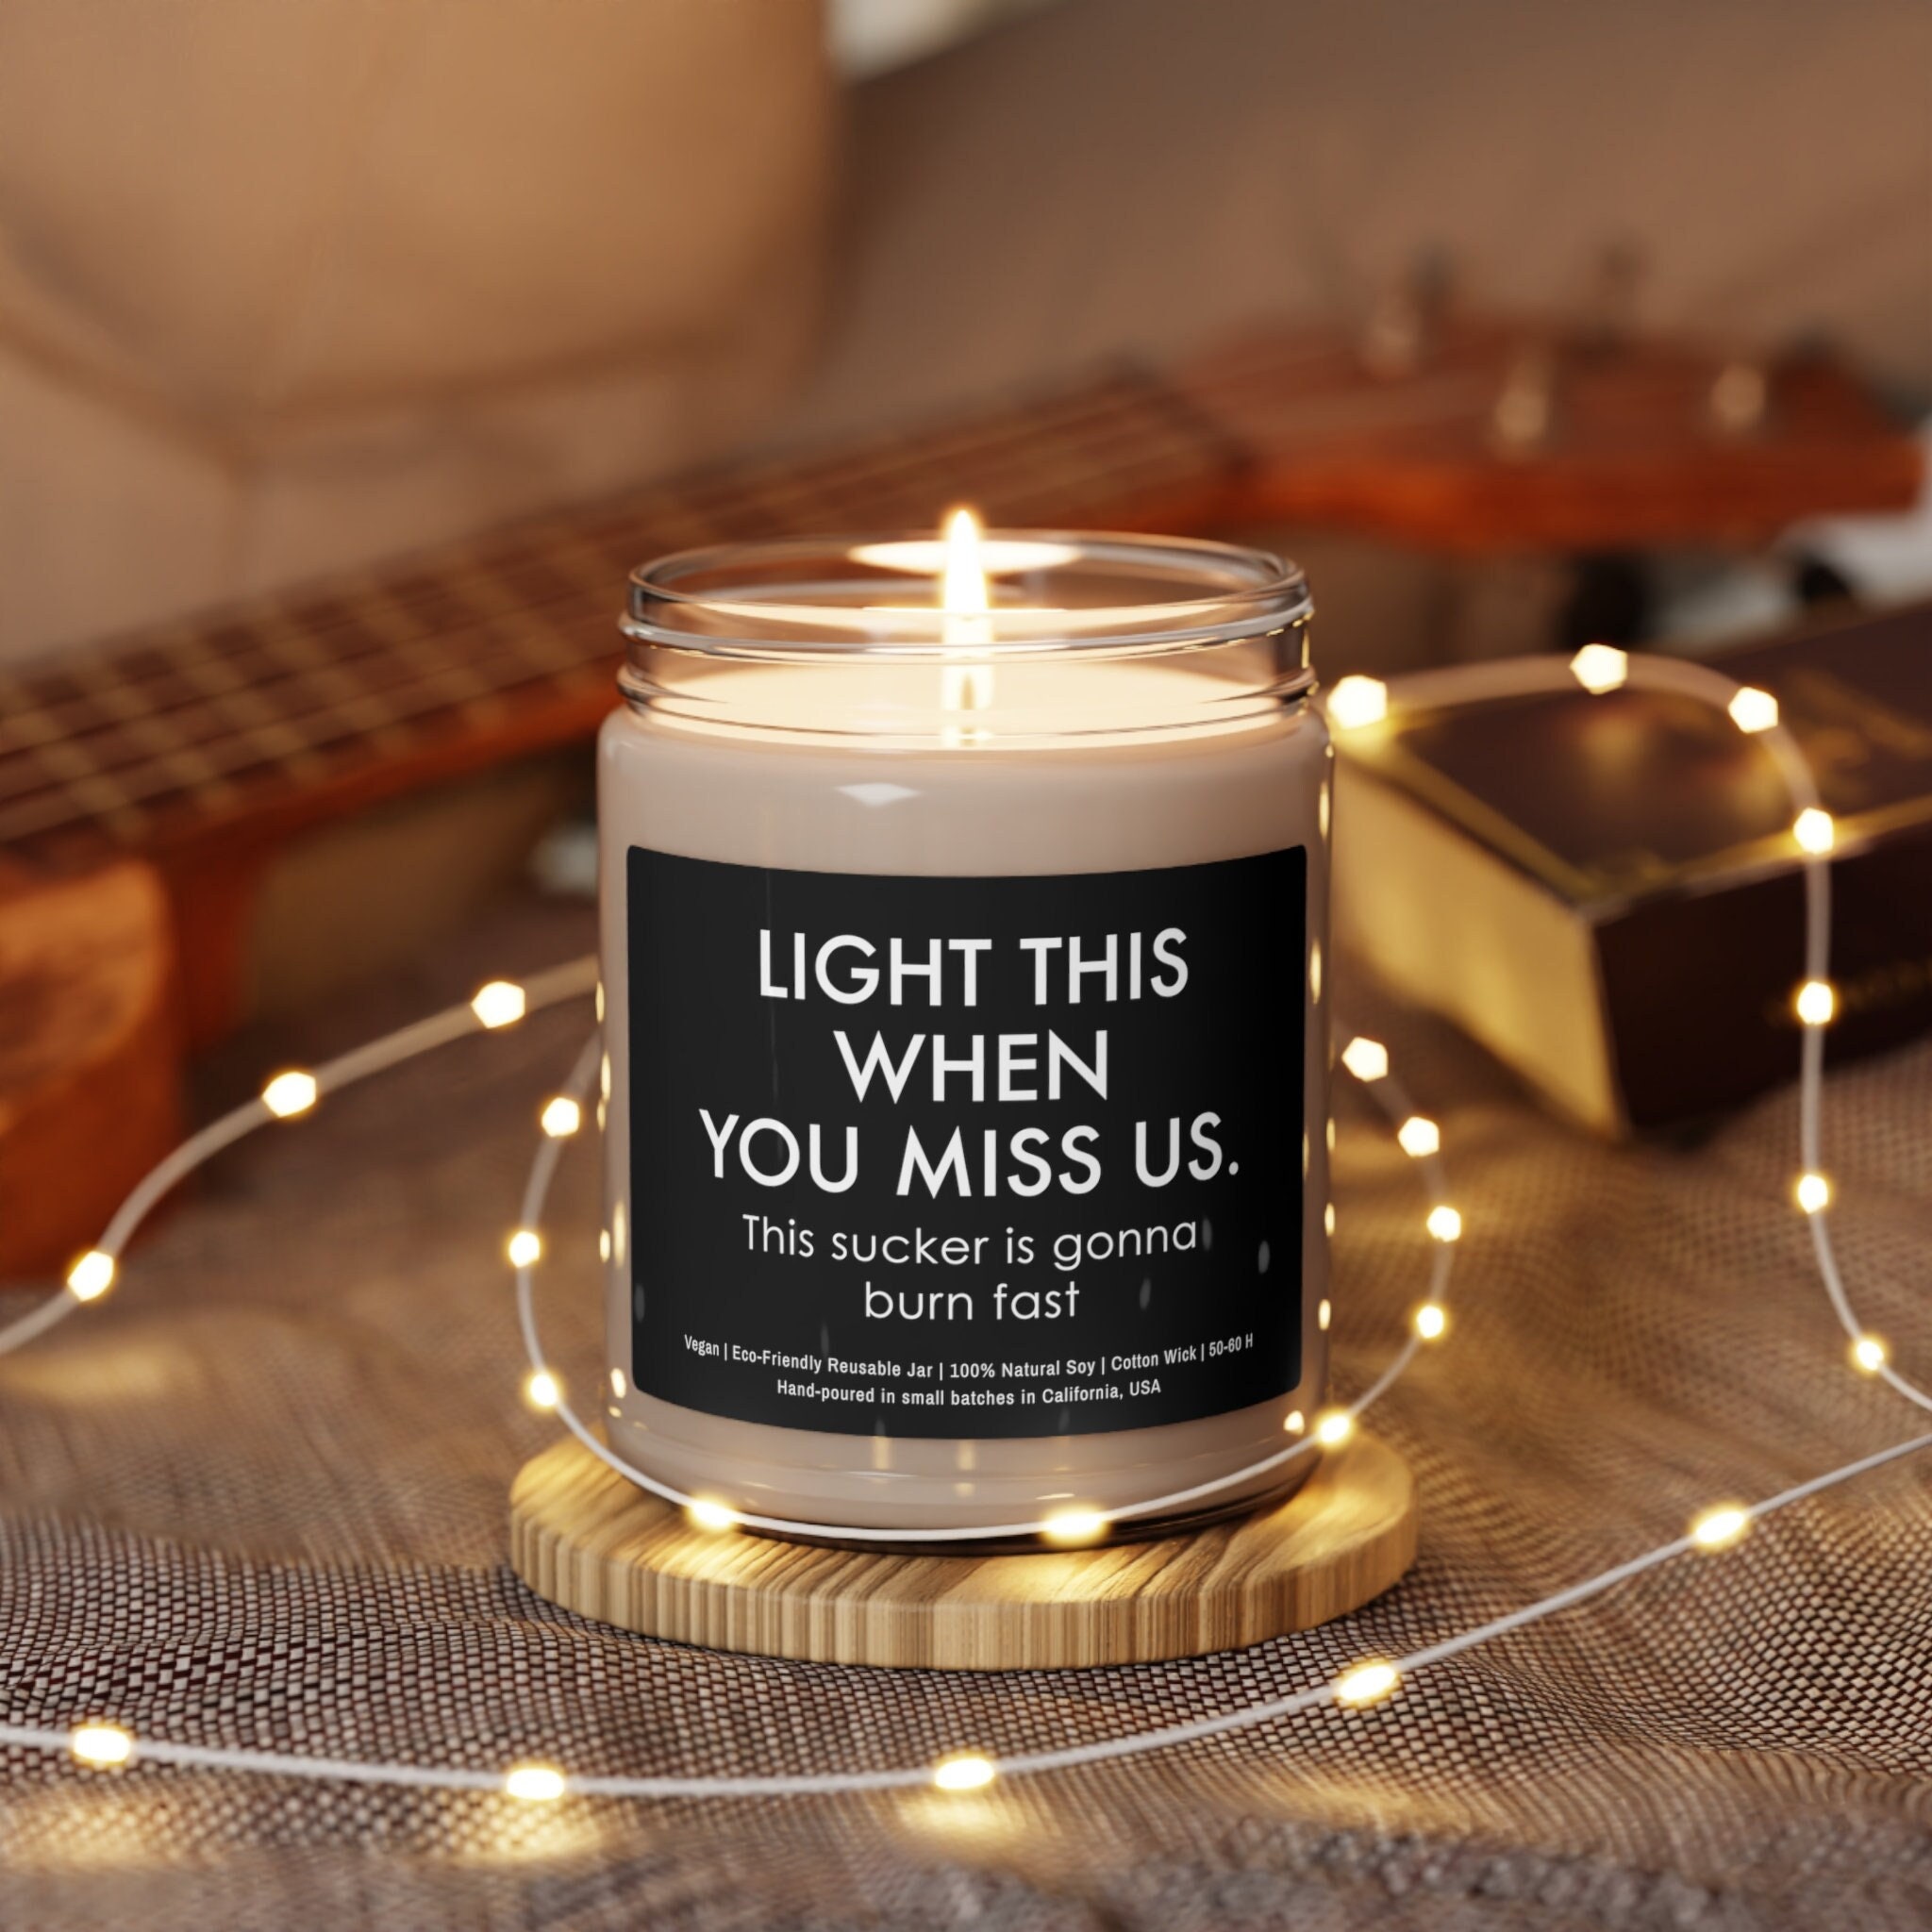 Work Will Suck Without You - Going Away Gifts for Coworkers, Boss, Best  Friend, New Job Gifts, Coworker Leaving Gifts, Funny Candle for Women, Men